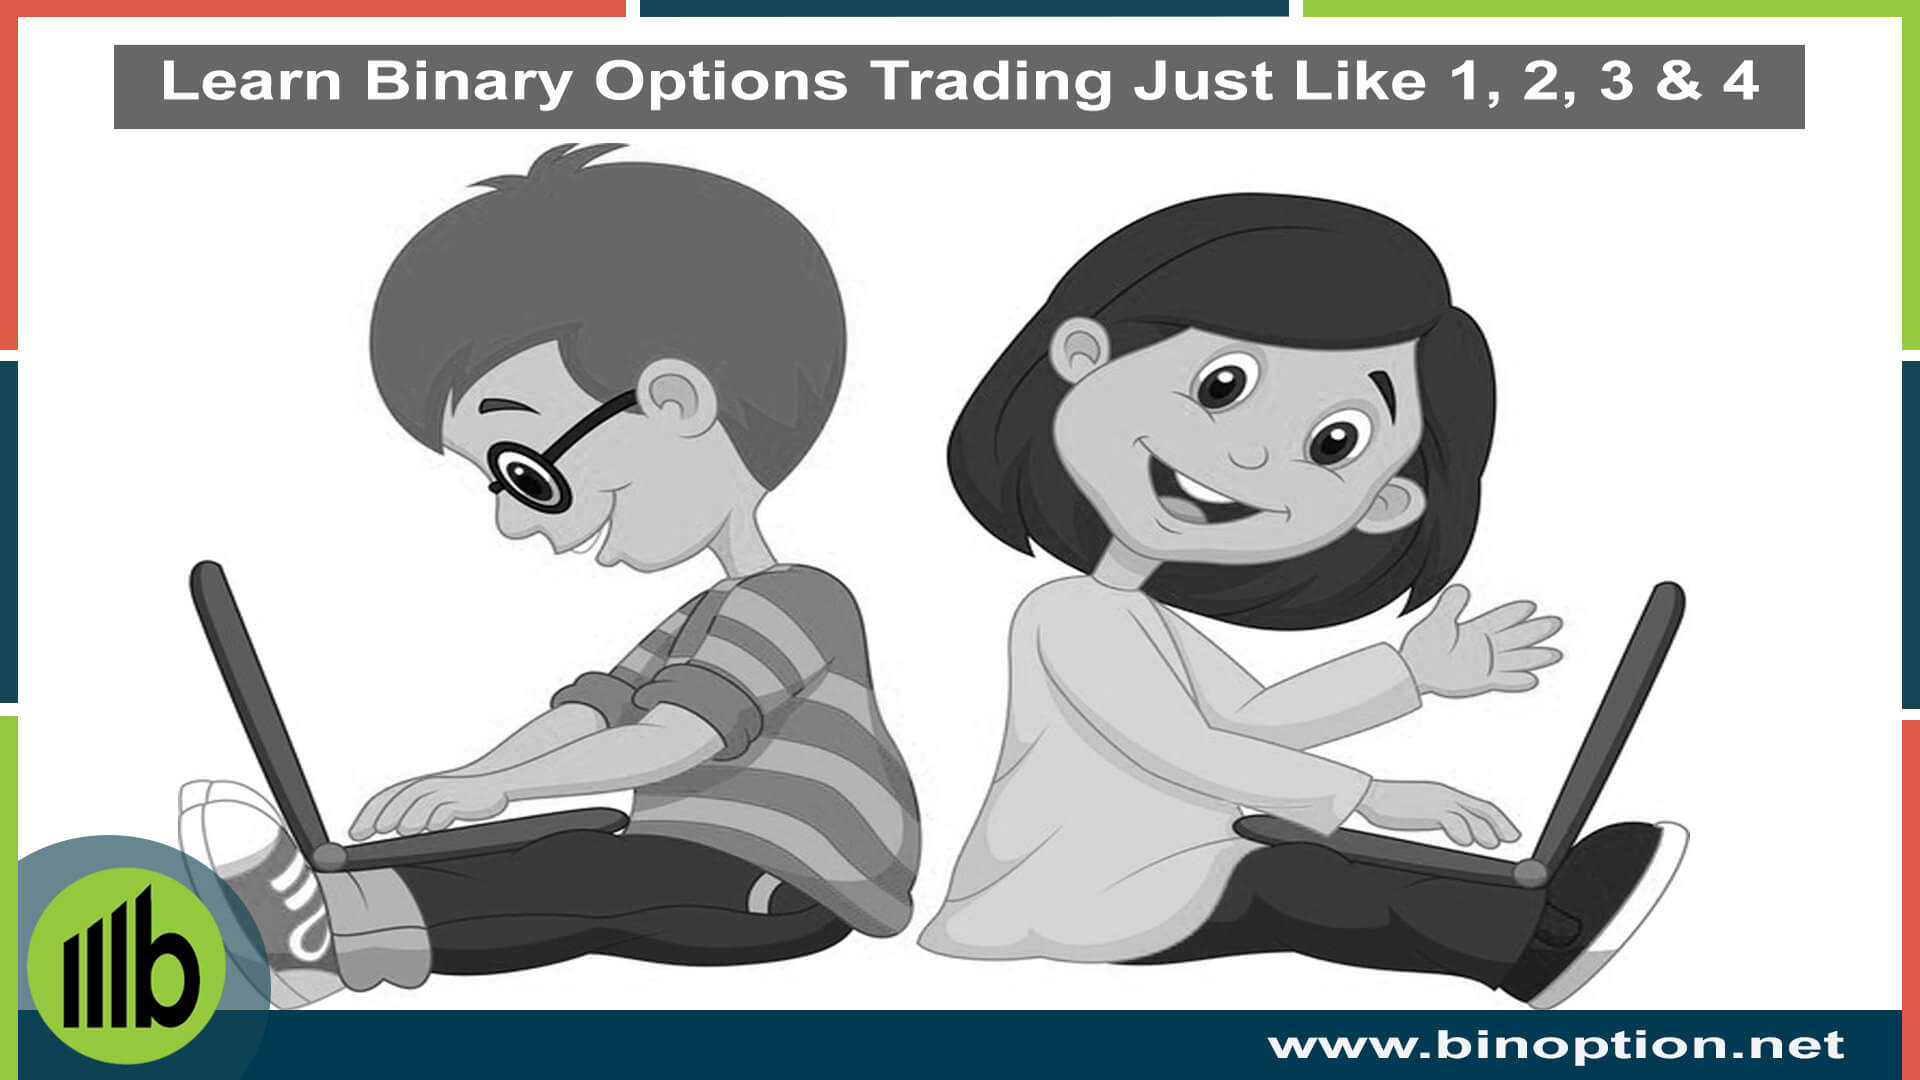 Learn about binary options